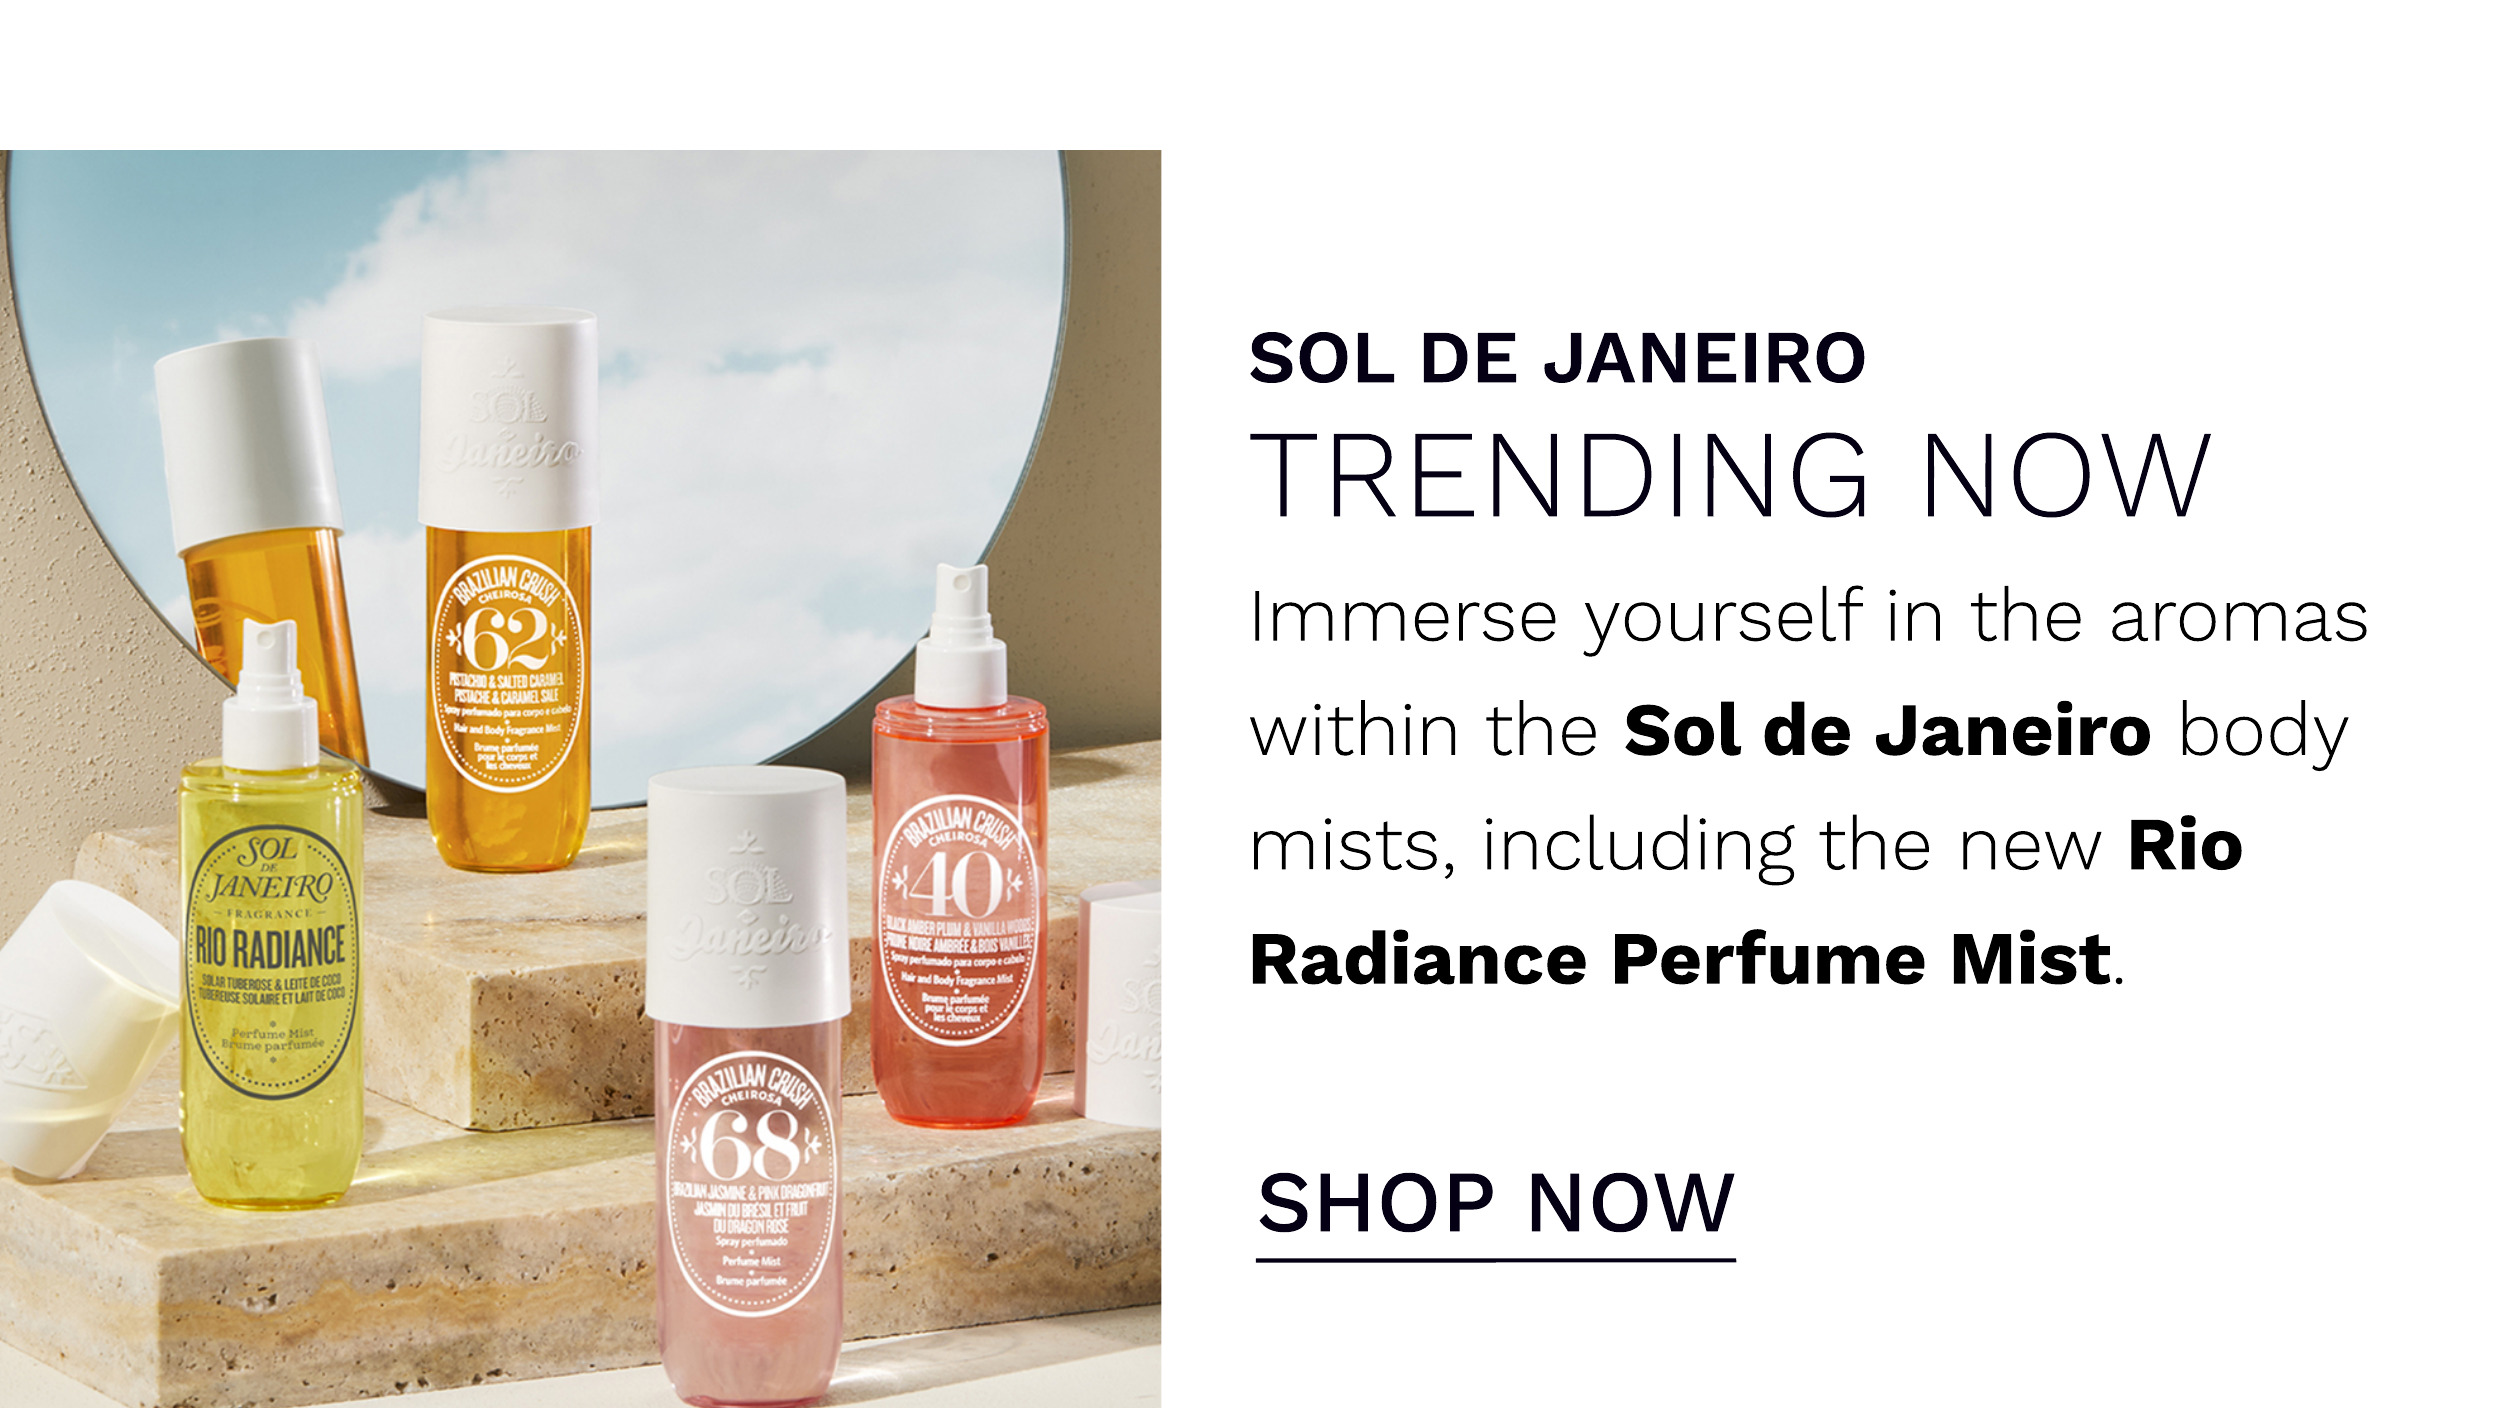  SOL DE JANEIRO TRENDING NOW Immerse yourself in the aromas within the Sol de Janeiro body mists, including the new Rio Radiance Perfume Mist. SHOP NOW 